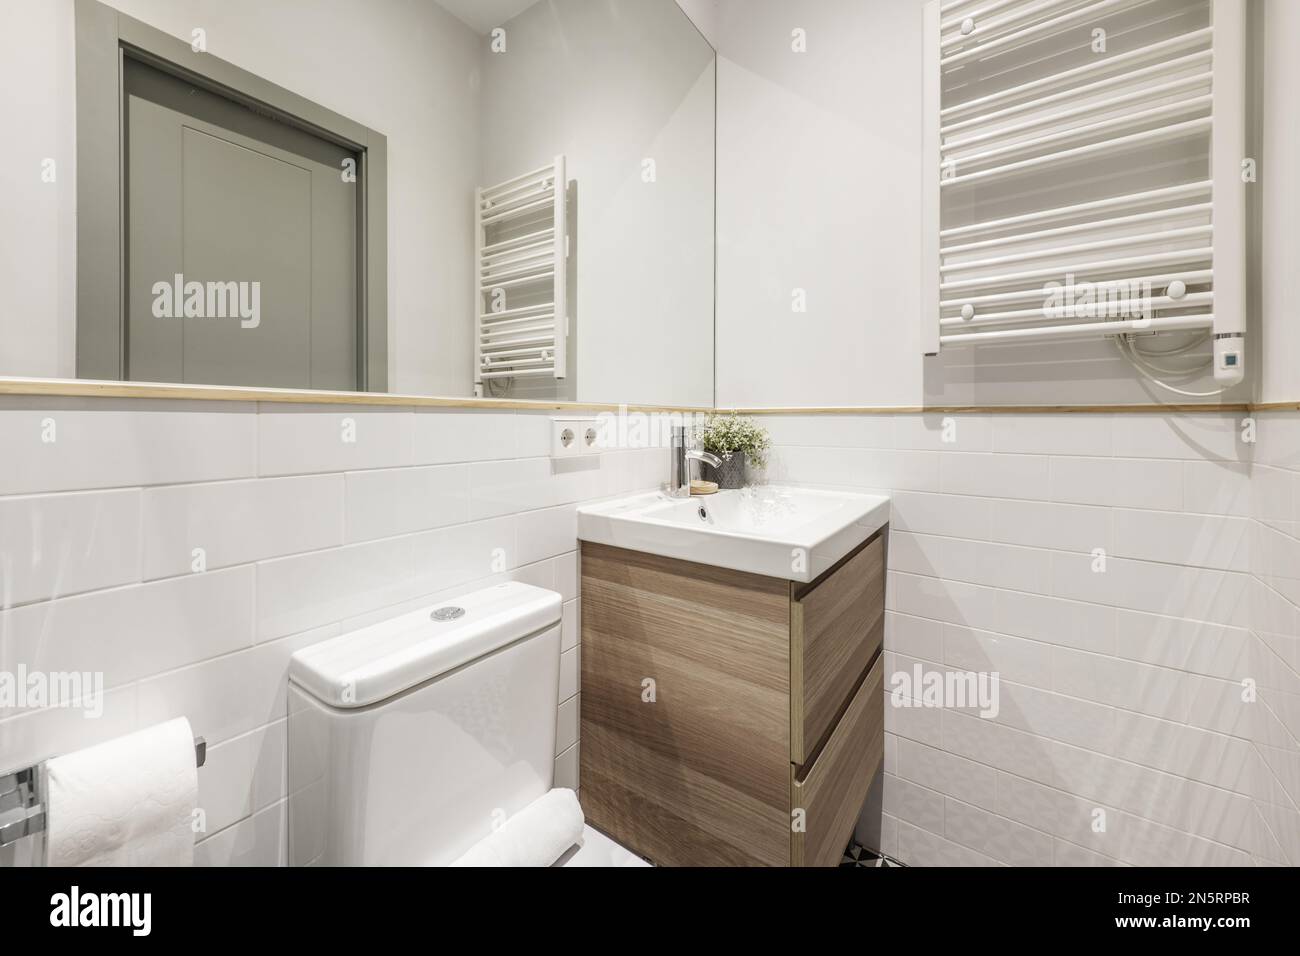 Newly renovated bathroom white porcelain sink on wooden cabinet with drawers, heated towel rail, integrated wall mirror with wooden border and decorat Stock Photo